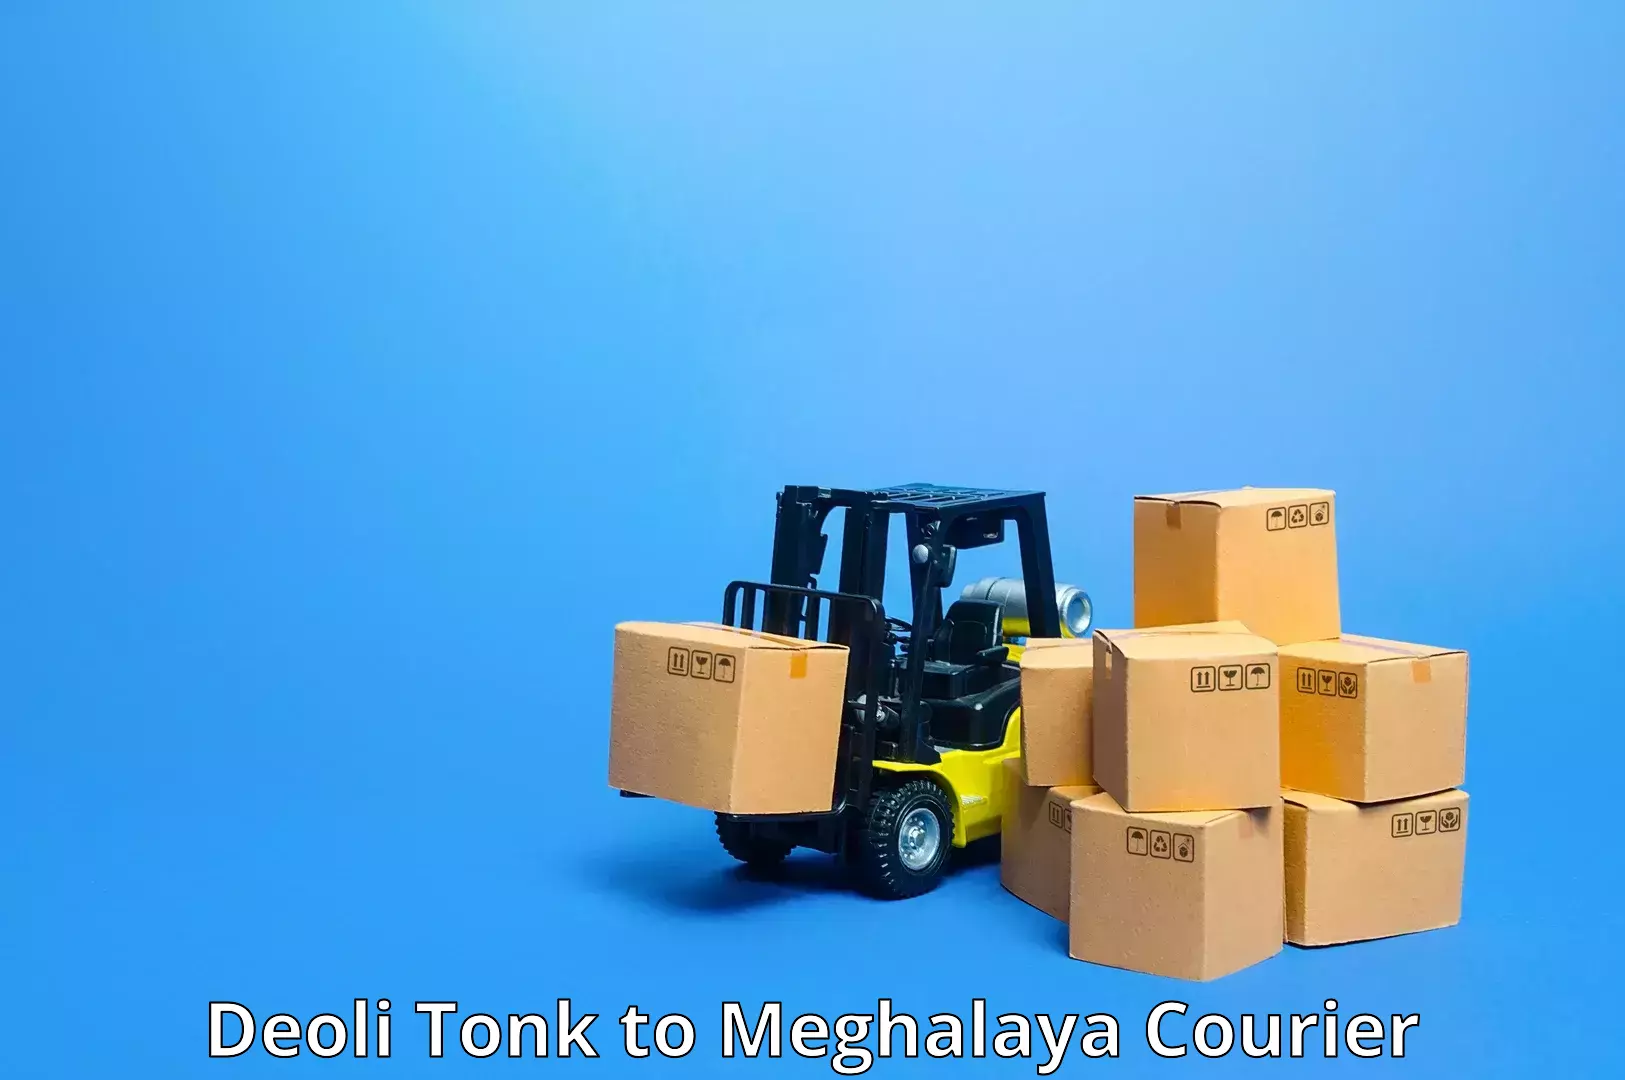 Global courier networks Deoli Tonk to Nongpoh